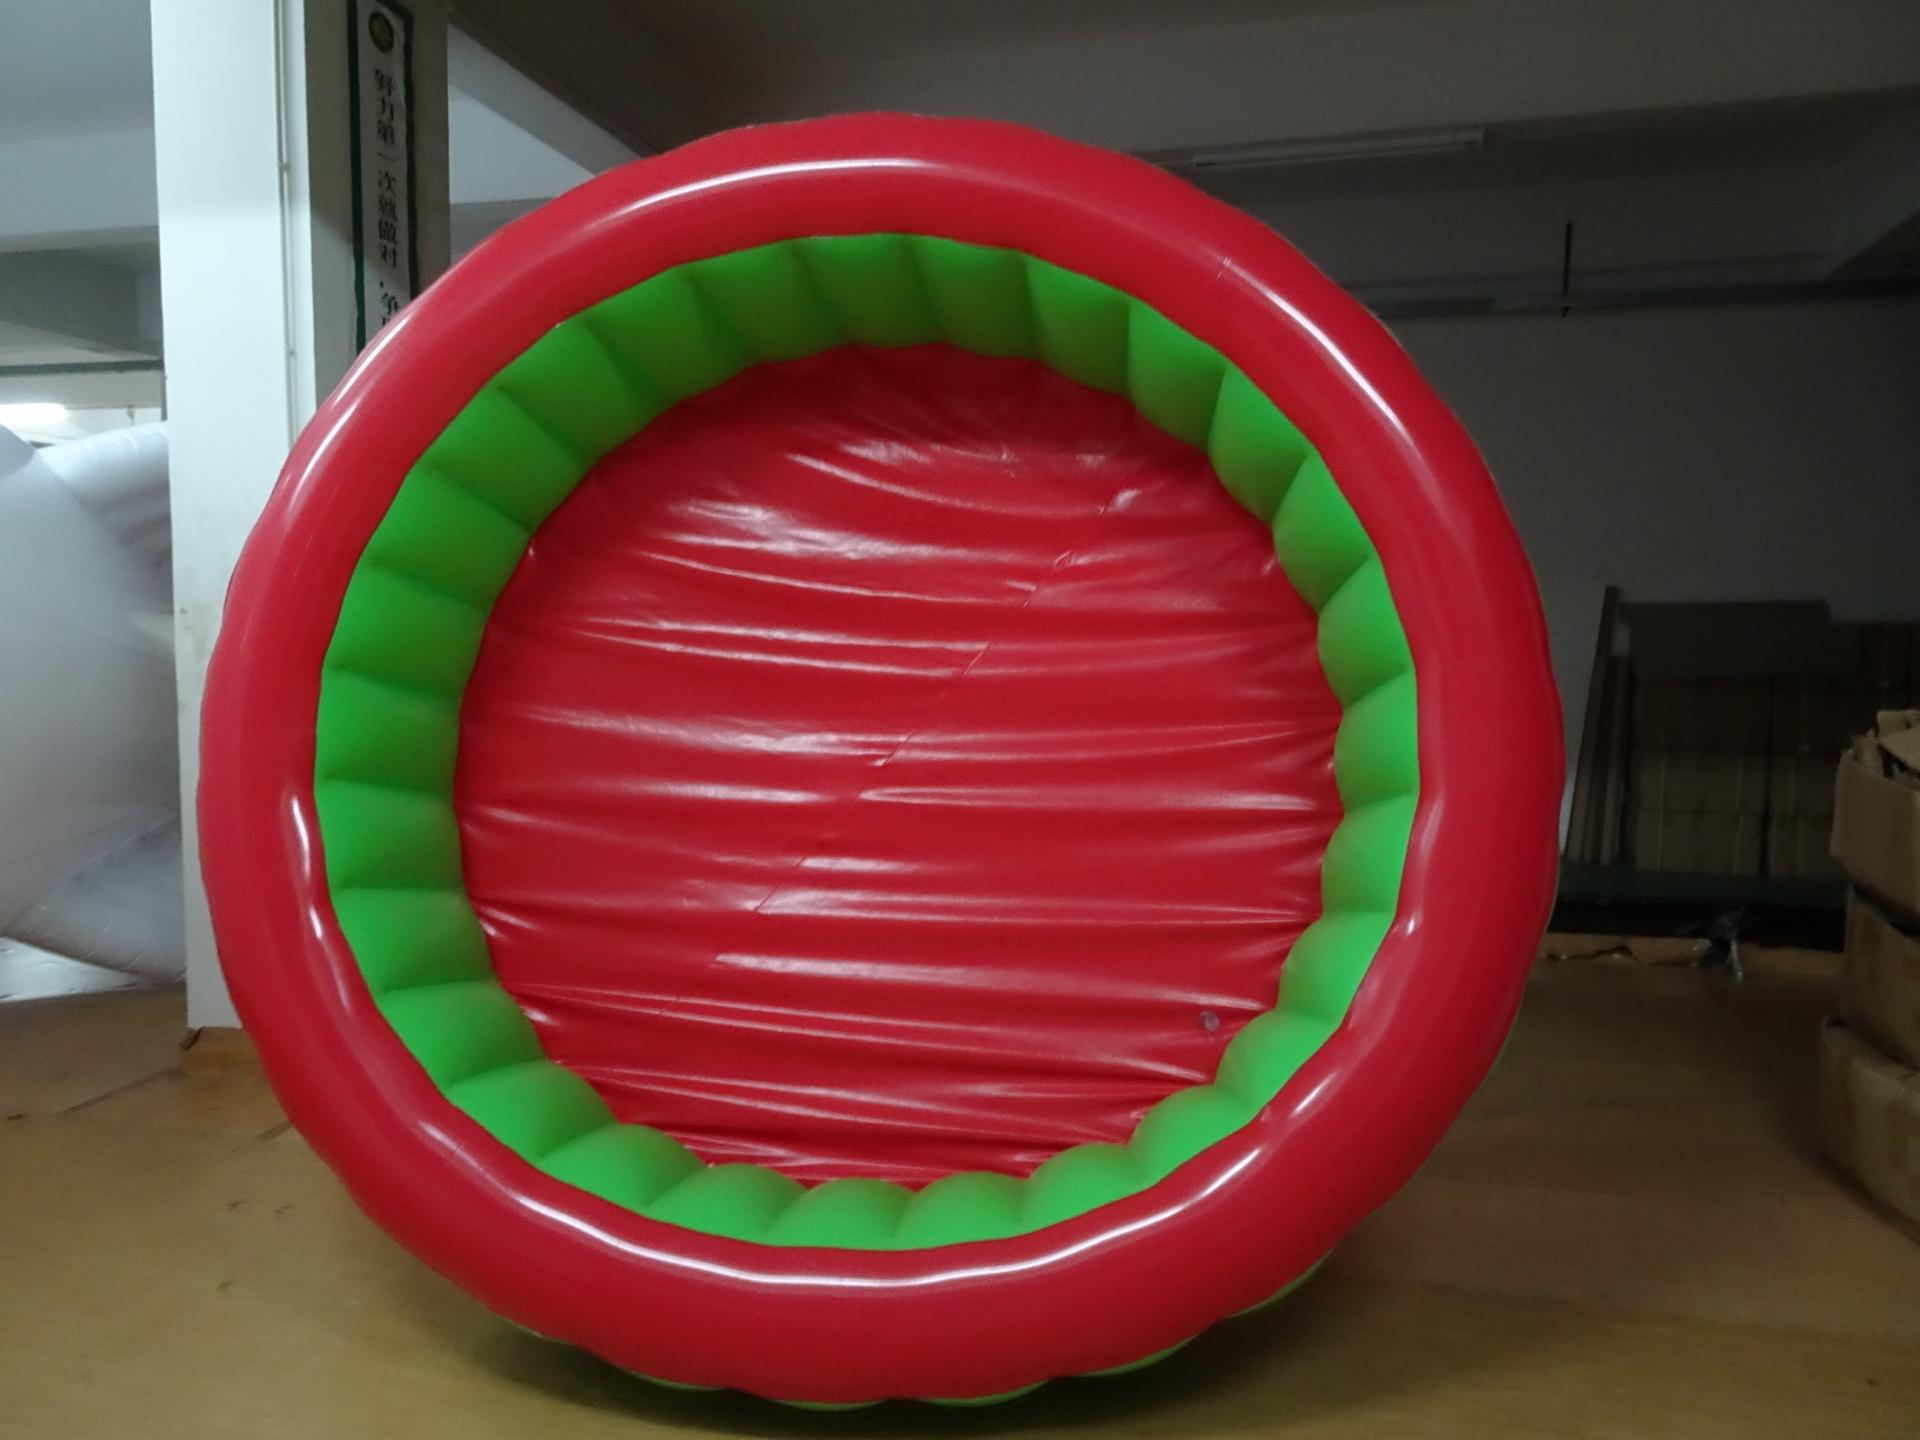 Customised Red And Green Color Round Shape Baby Pool For Indoor And Outdoor Water Game Play Center